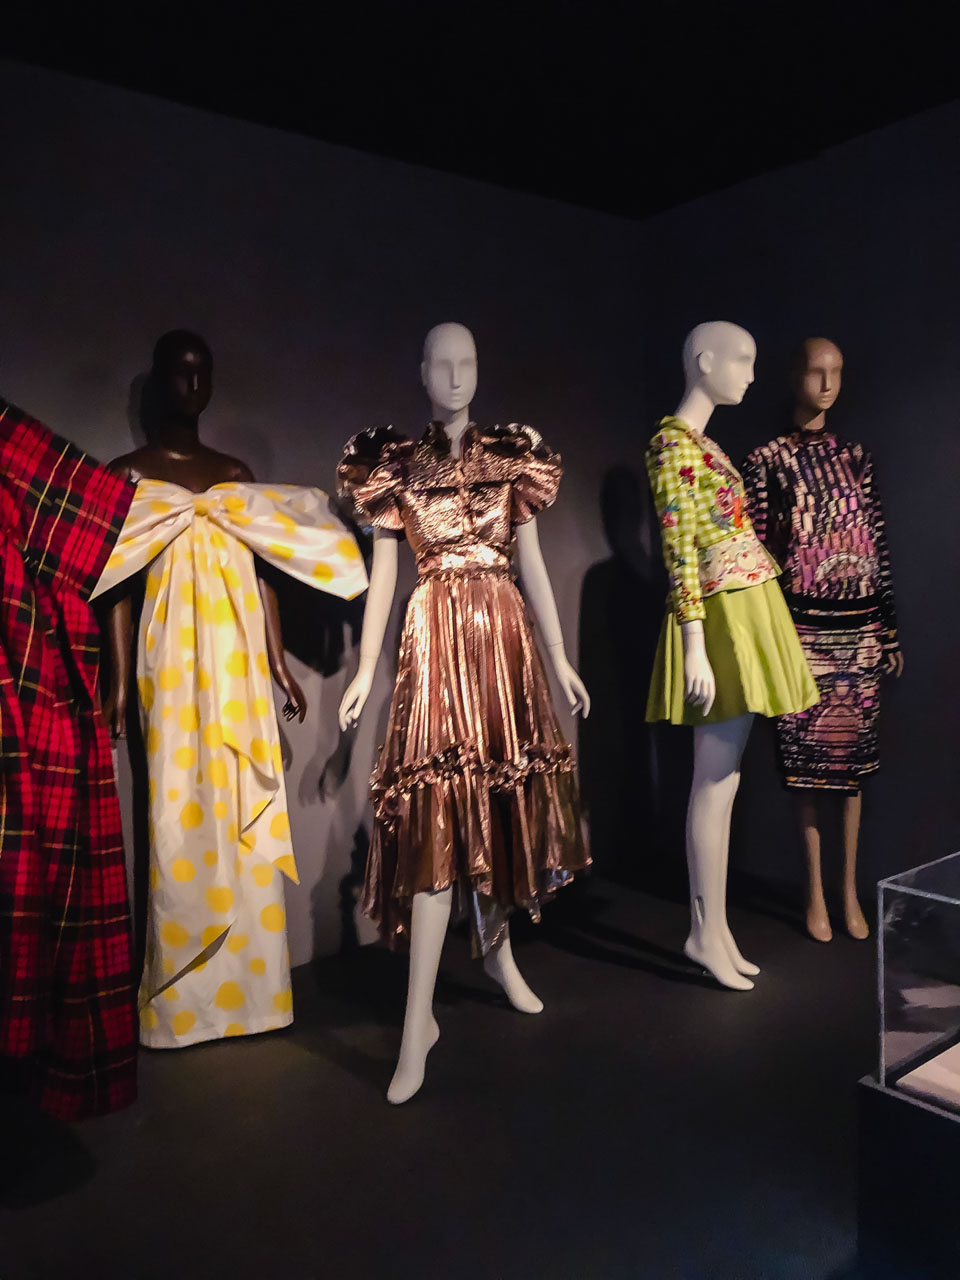 Dresses on display at the Museum at the Fashion Institute of Technology in New York